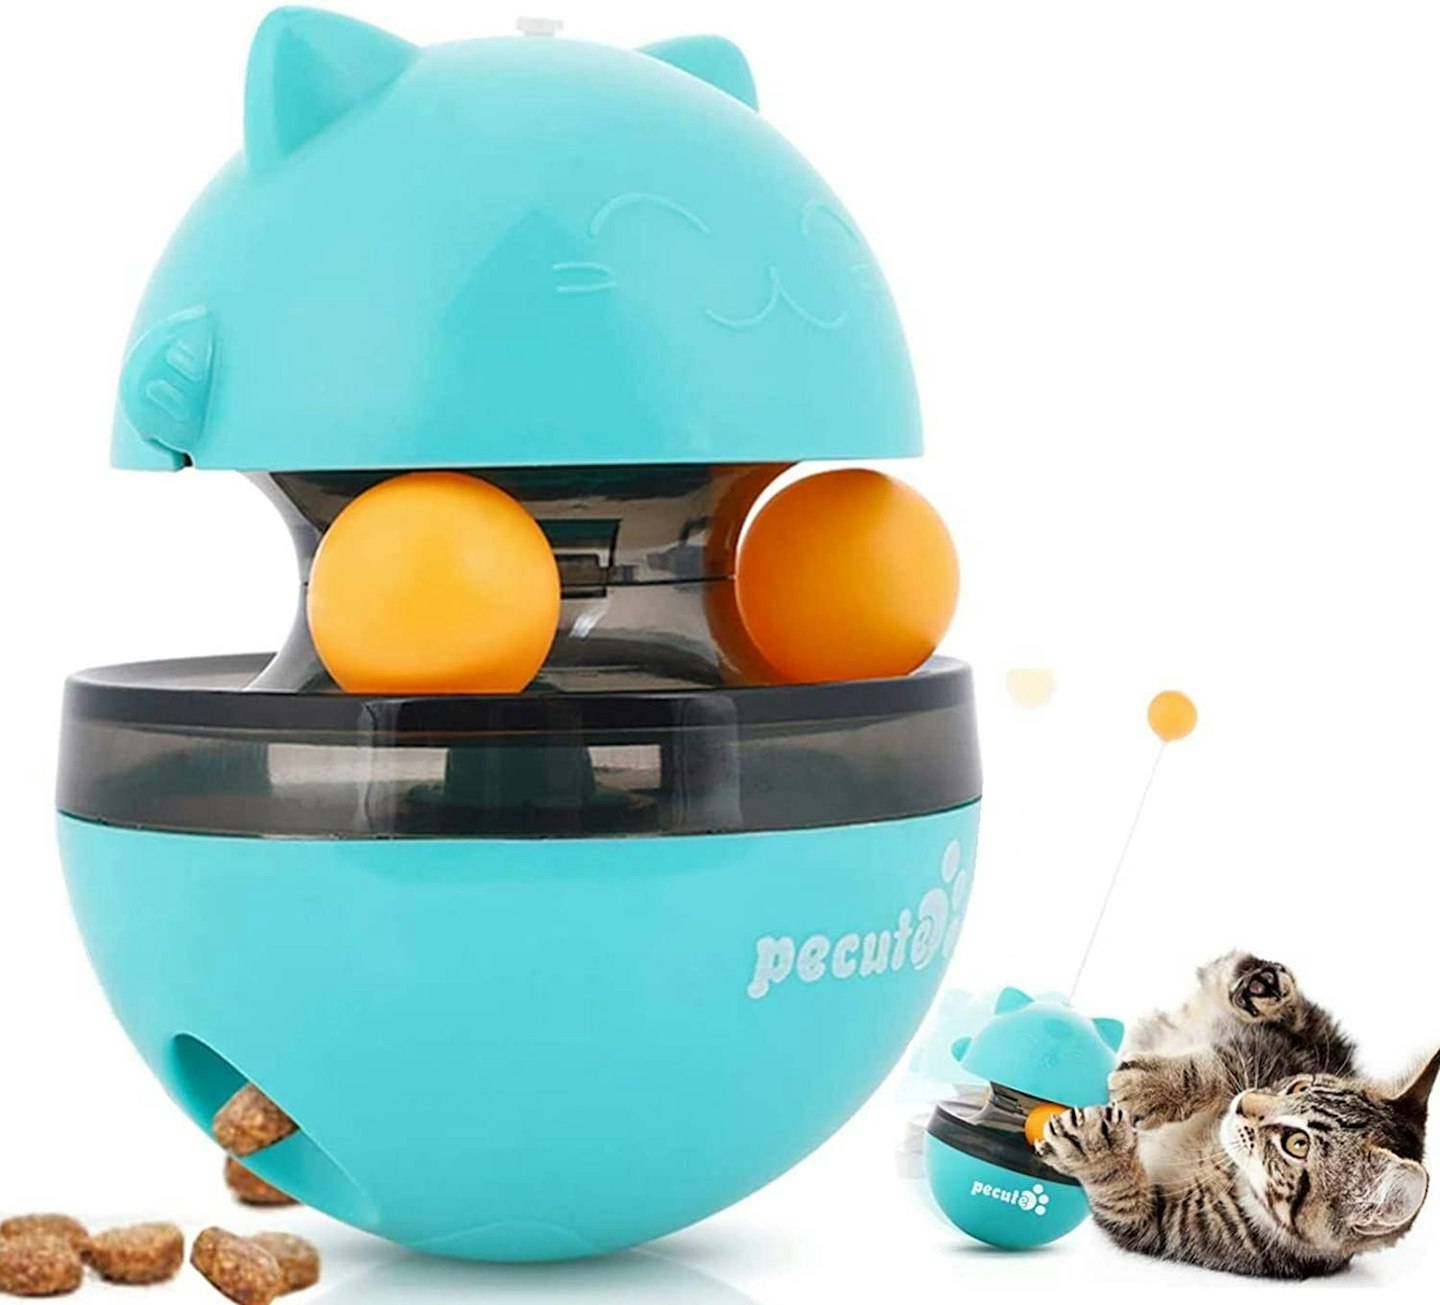 Pecute Cat Treat Toy: 4 In 1 Interactive Cat Toy